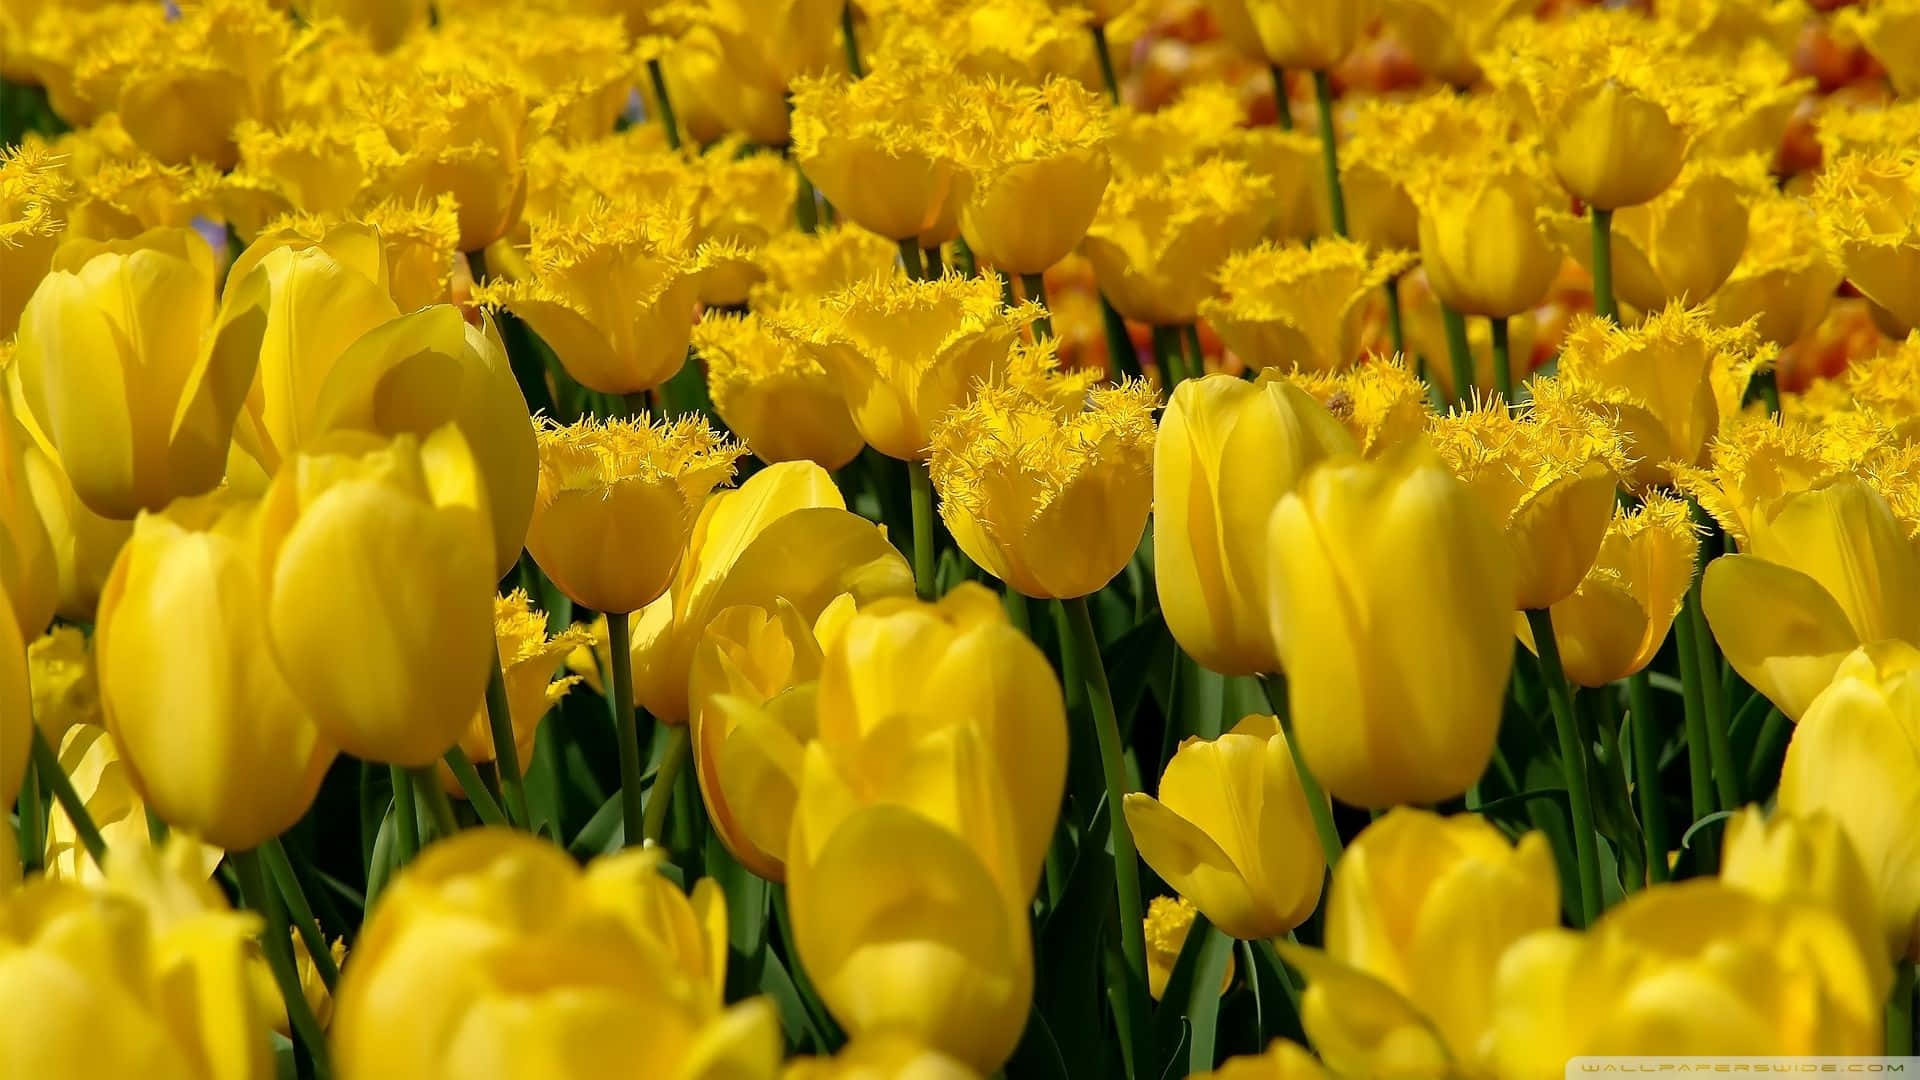 A Field Of Yellow Tulips In Bloom